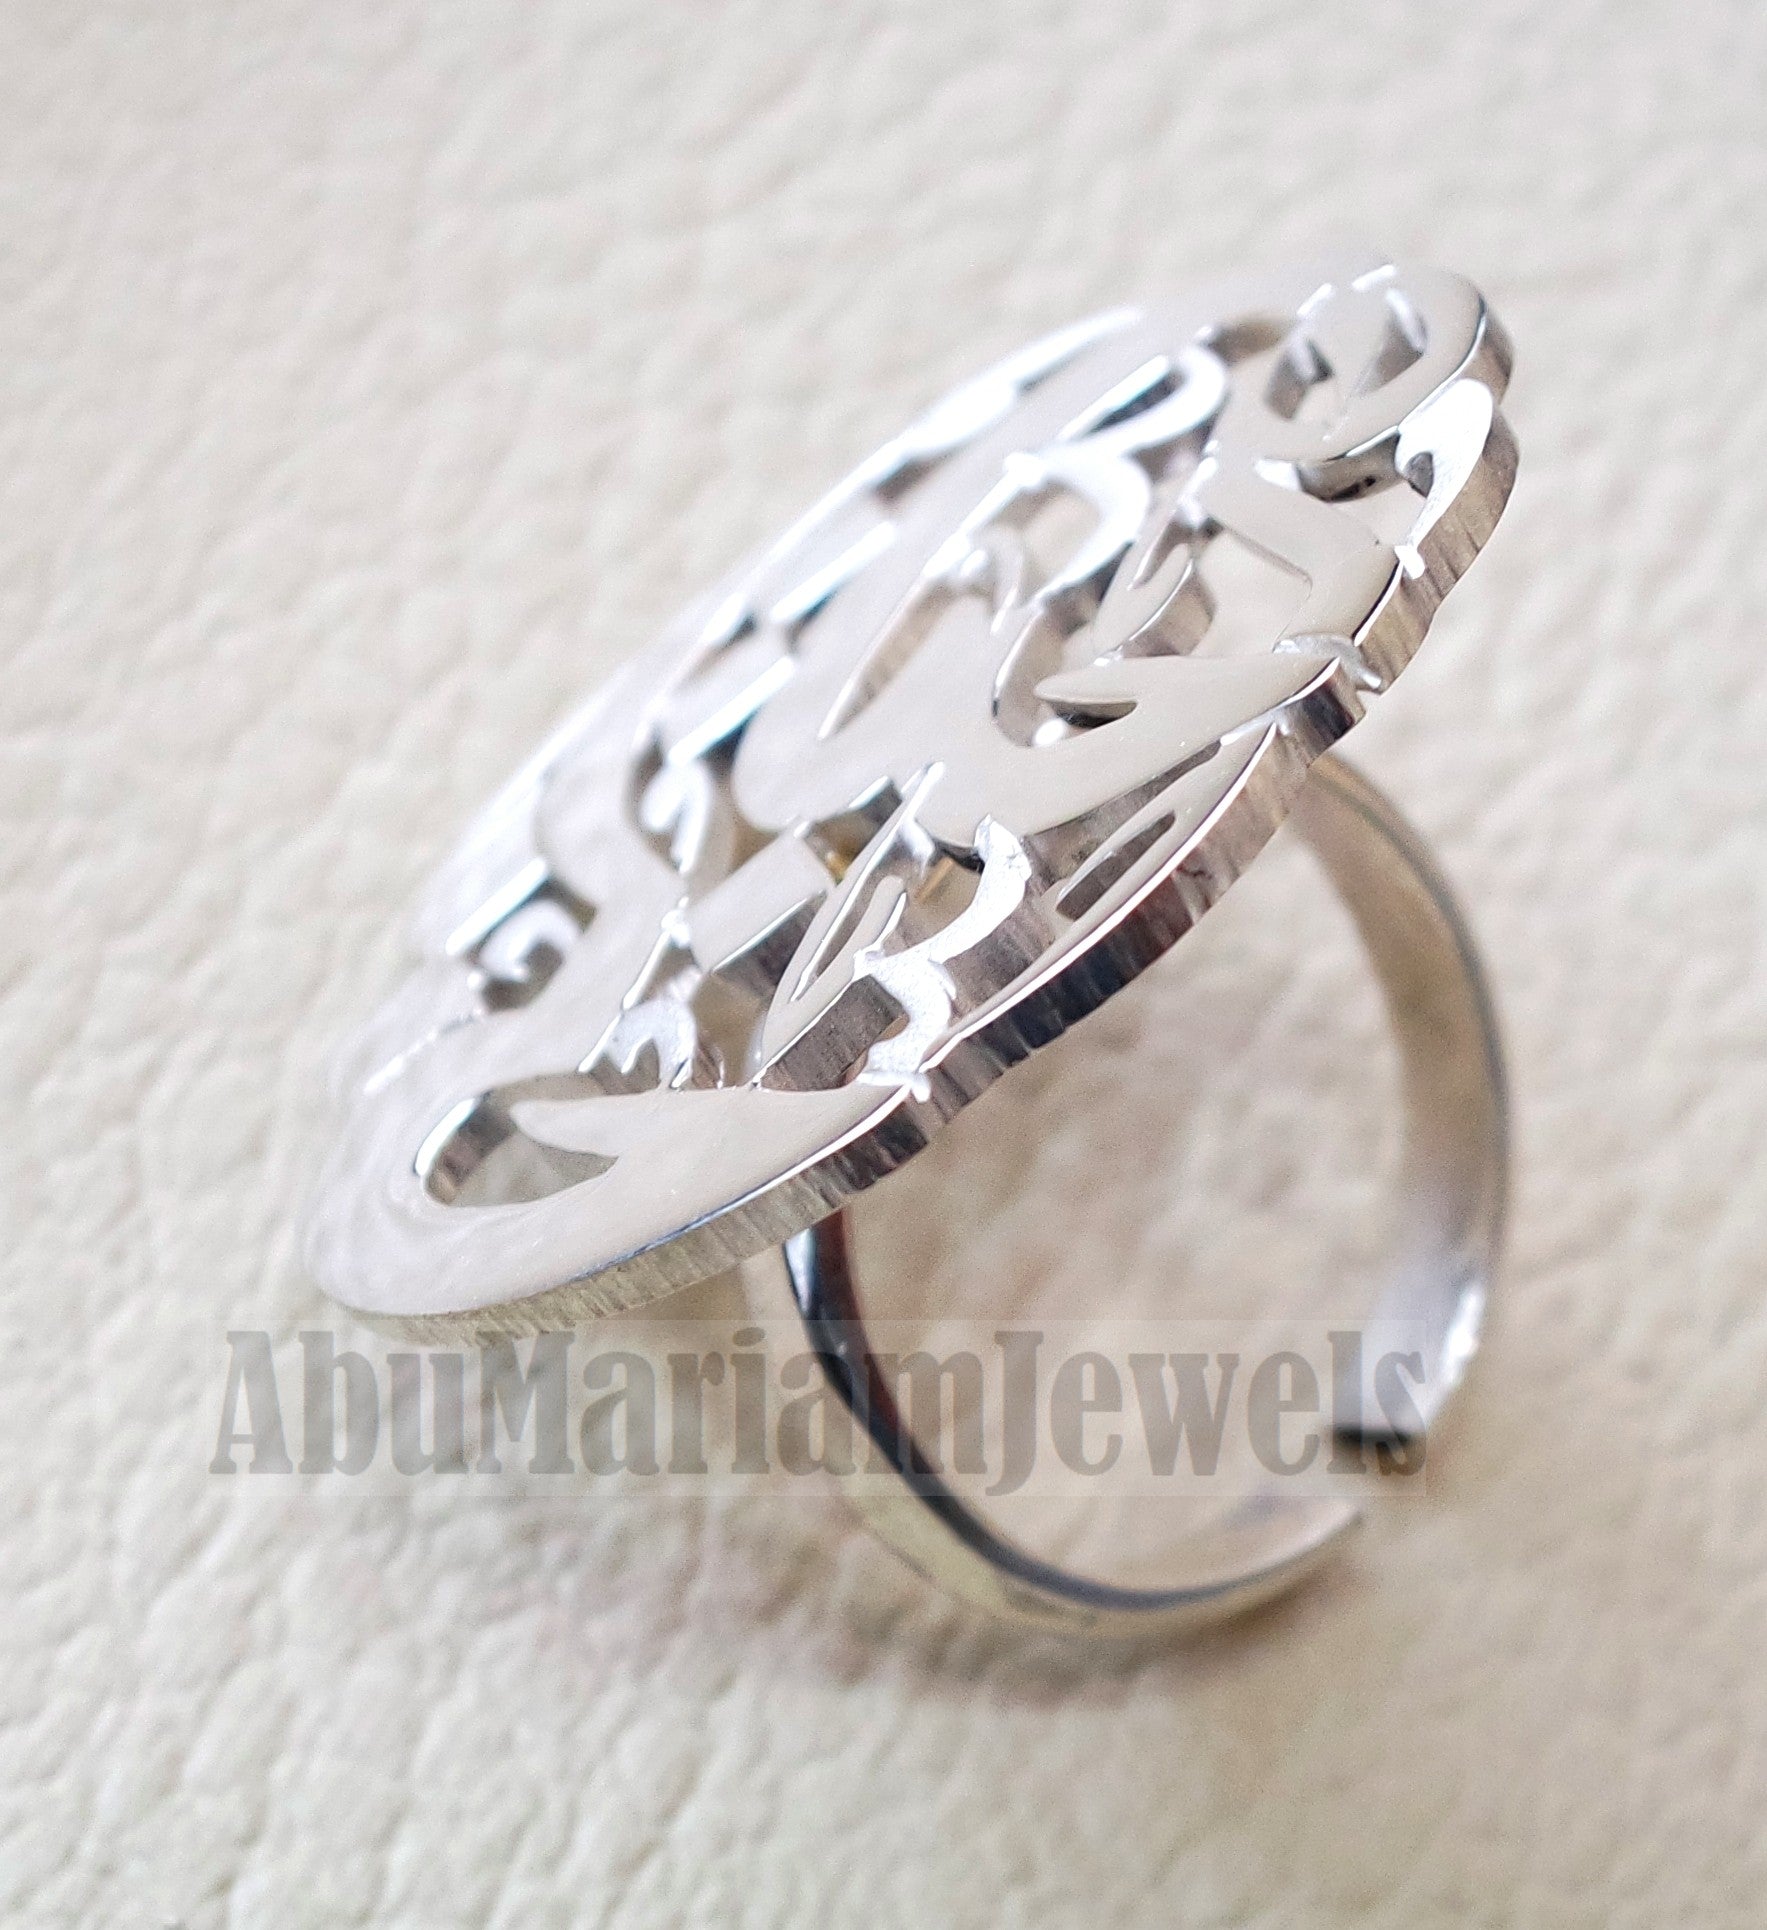 personalized arabic arab jewelry calligraphy customized name sterling silver 925 high quality fit all sizes any name خاتم اسماء عربي